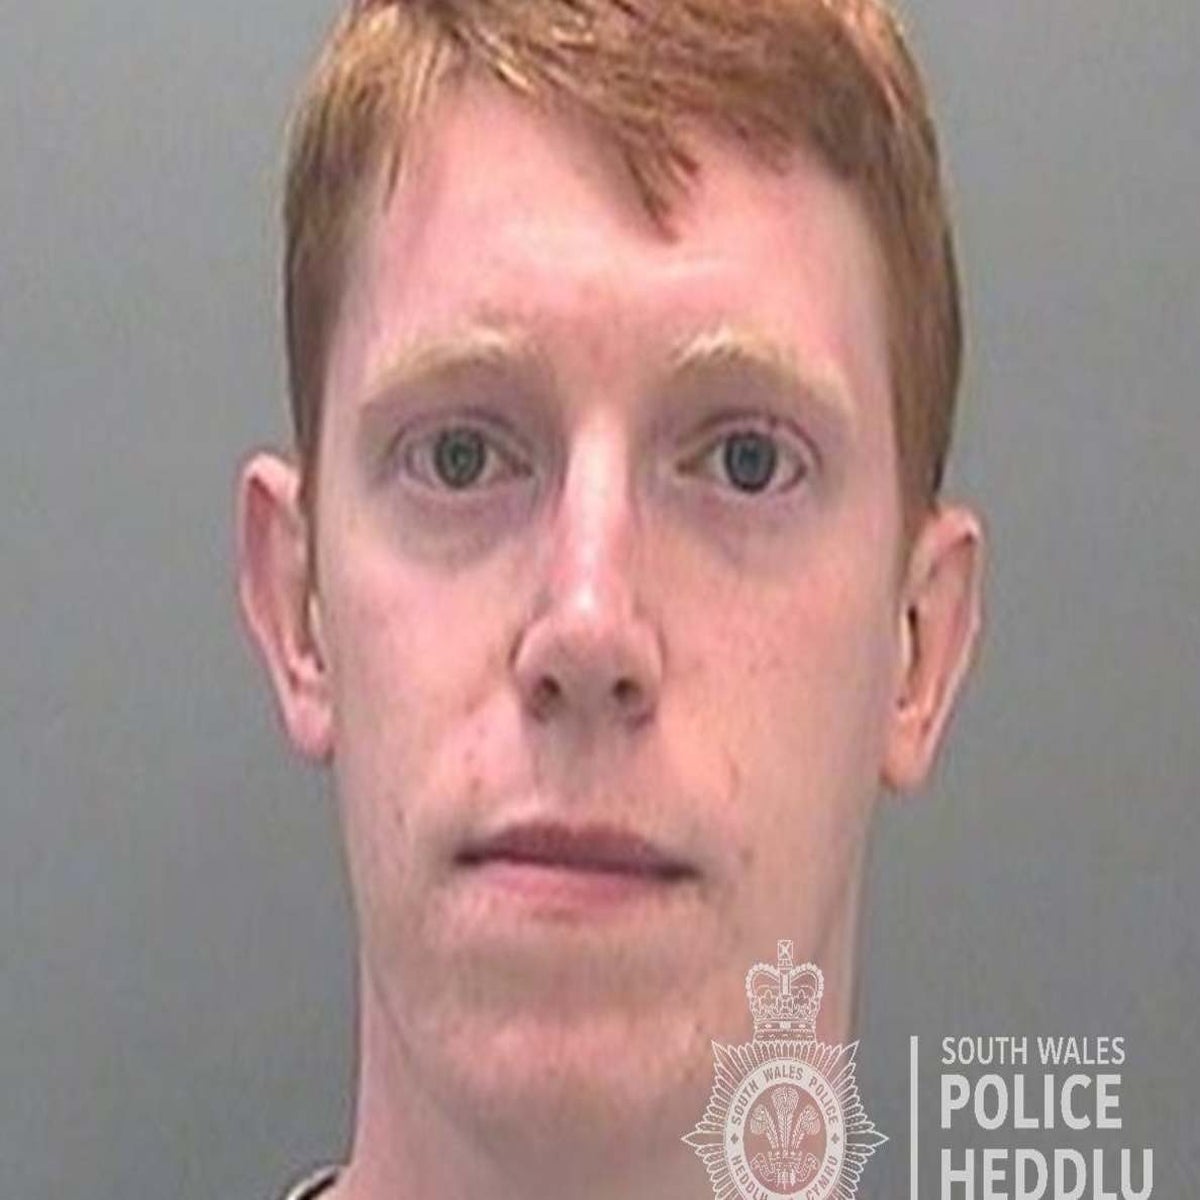 Sex Videos Litil Boy - Army cadet trainer tricked boys into performing sex acts by posing as  15-year-old girl 'bait' | The Independent | The Independent